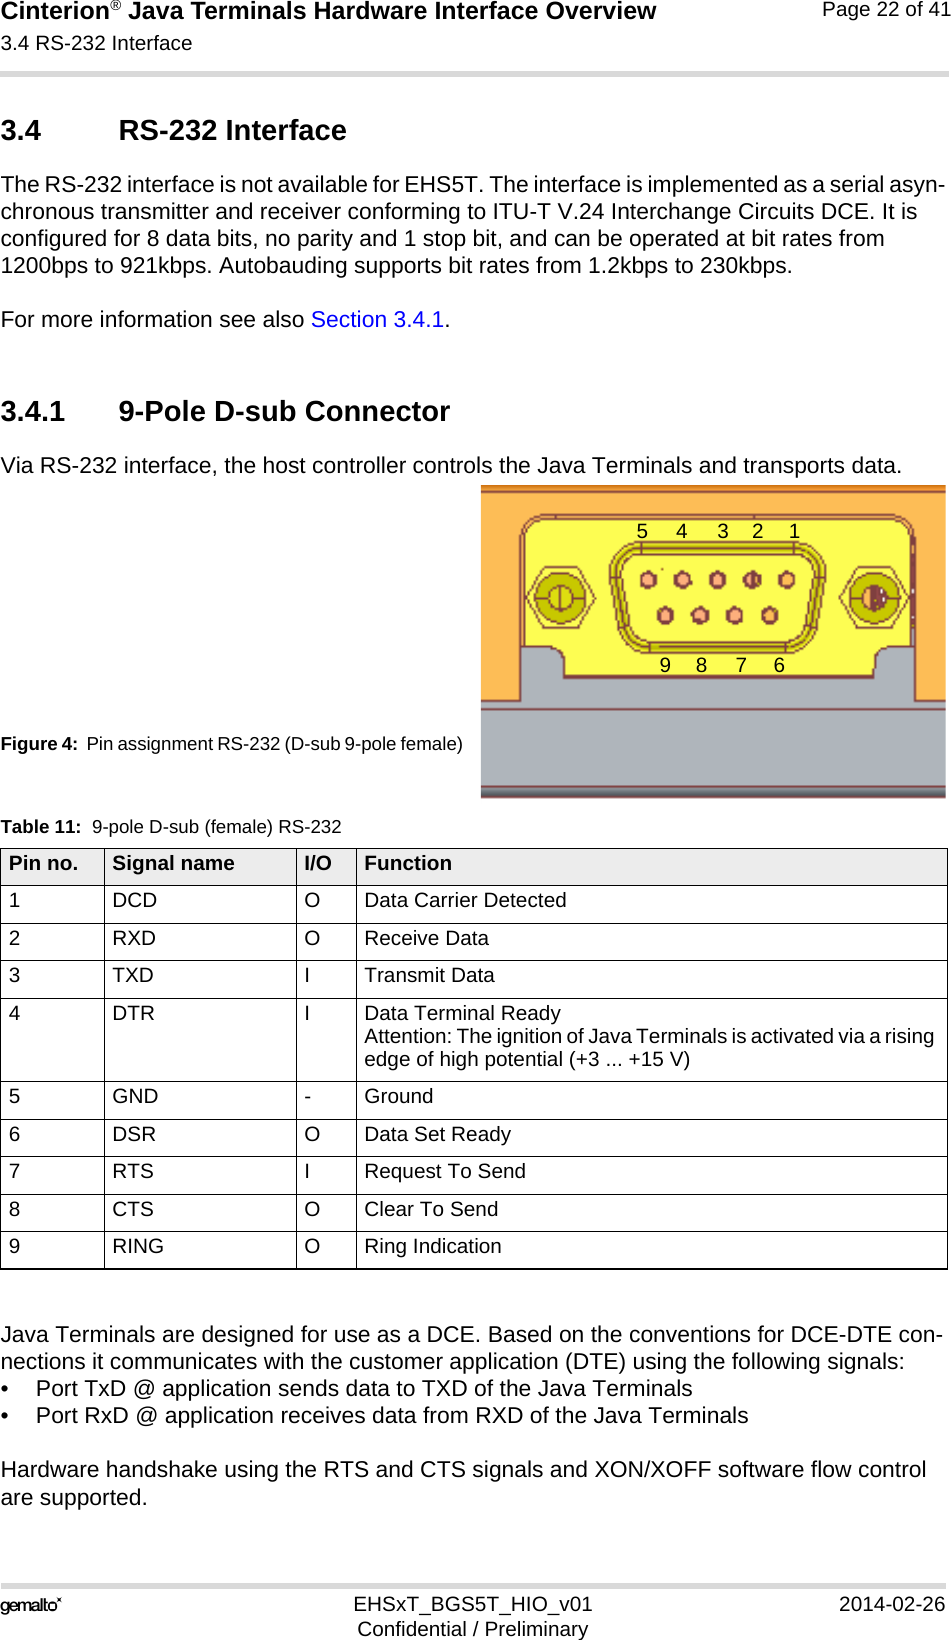 Cinterion® Java Terminals Hardware Interface Overview3.4 RS-232 Interface32EHSxT_BGS5T_HIO_v01 2014-02-26Confidential / PreliminaryPage 22 of 413.4 RS-232 InterfaceThe RS-232 interface is not available for EHS5T. The interface is implemented as a serial asyn-chronous transmitter and receiver conforming to ITU-T V.24 Interchange Circuits DCE. It is configured for 8 data bits, no parity and 1 stop bit, and can be operated at bit rates from 1200bps to 921kbps. Autobauding supports bit rates from 1.2kbps to 230kbps.For more information see also Section 3.4.1.3.4.1 9-Pole D-sub ConnectorVia RS-232 interface, the host controller controls the Java Terminals and transports data.Figure 4:  Pin assignment RS-232 (D-sub 9-pole female)Java Terminals are designed for use as a DCE. Based on the conventions for DCE-DTE con-nections it communicates with the customer application (DTE) using the following signals:• Port TxD @ application sends data to TXD of the Java Terminals• Port RxD @ application receives data from RXD of the Java TerminalsHardware handshake using the RTS and CTS signals and XON/XOFF software flow control are supported.Table 11:  9-pole D-sub (female) RS-232Pin no. Signal name I/O Function1 DCD O Data Carrier Detected2RXD OReceive Data3 TXD I Transmit Data4 DTR I Data Terminal Ready Attention: The ignition of Java Terminals is activated via a rising edge of high potential (+3 ... +15 V) 5 GND - Ground6 DSR O Data Set Ready7 RTS I Request To Send8 CTS O Clear To Send9 RING O Ring Indication123456789